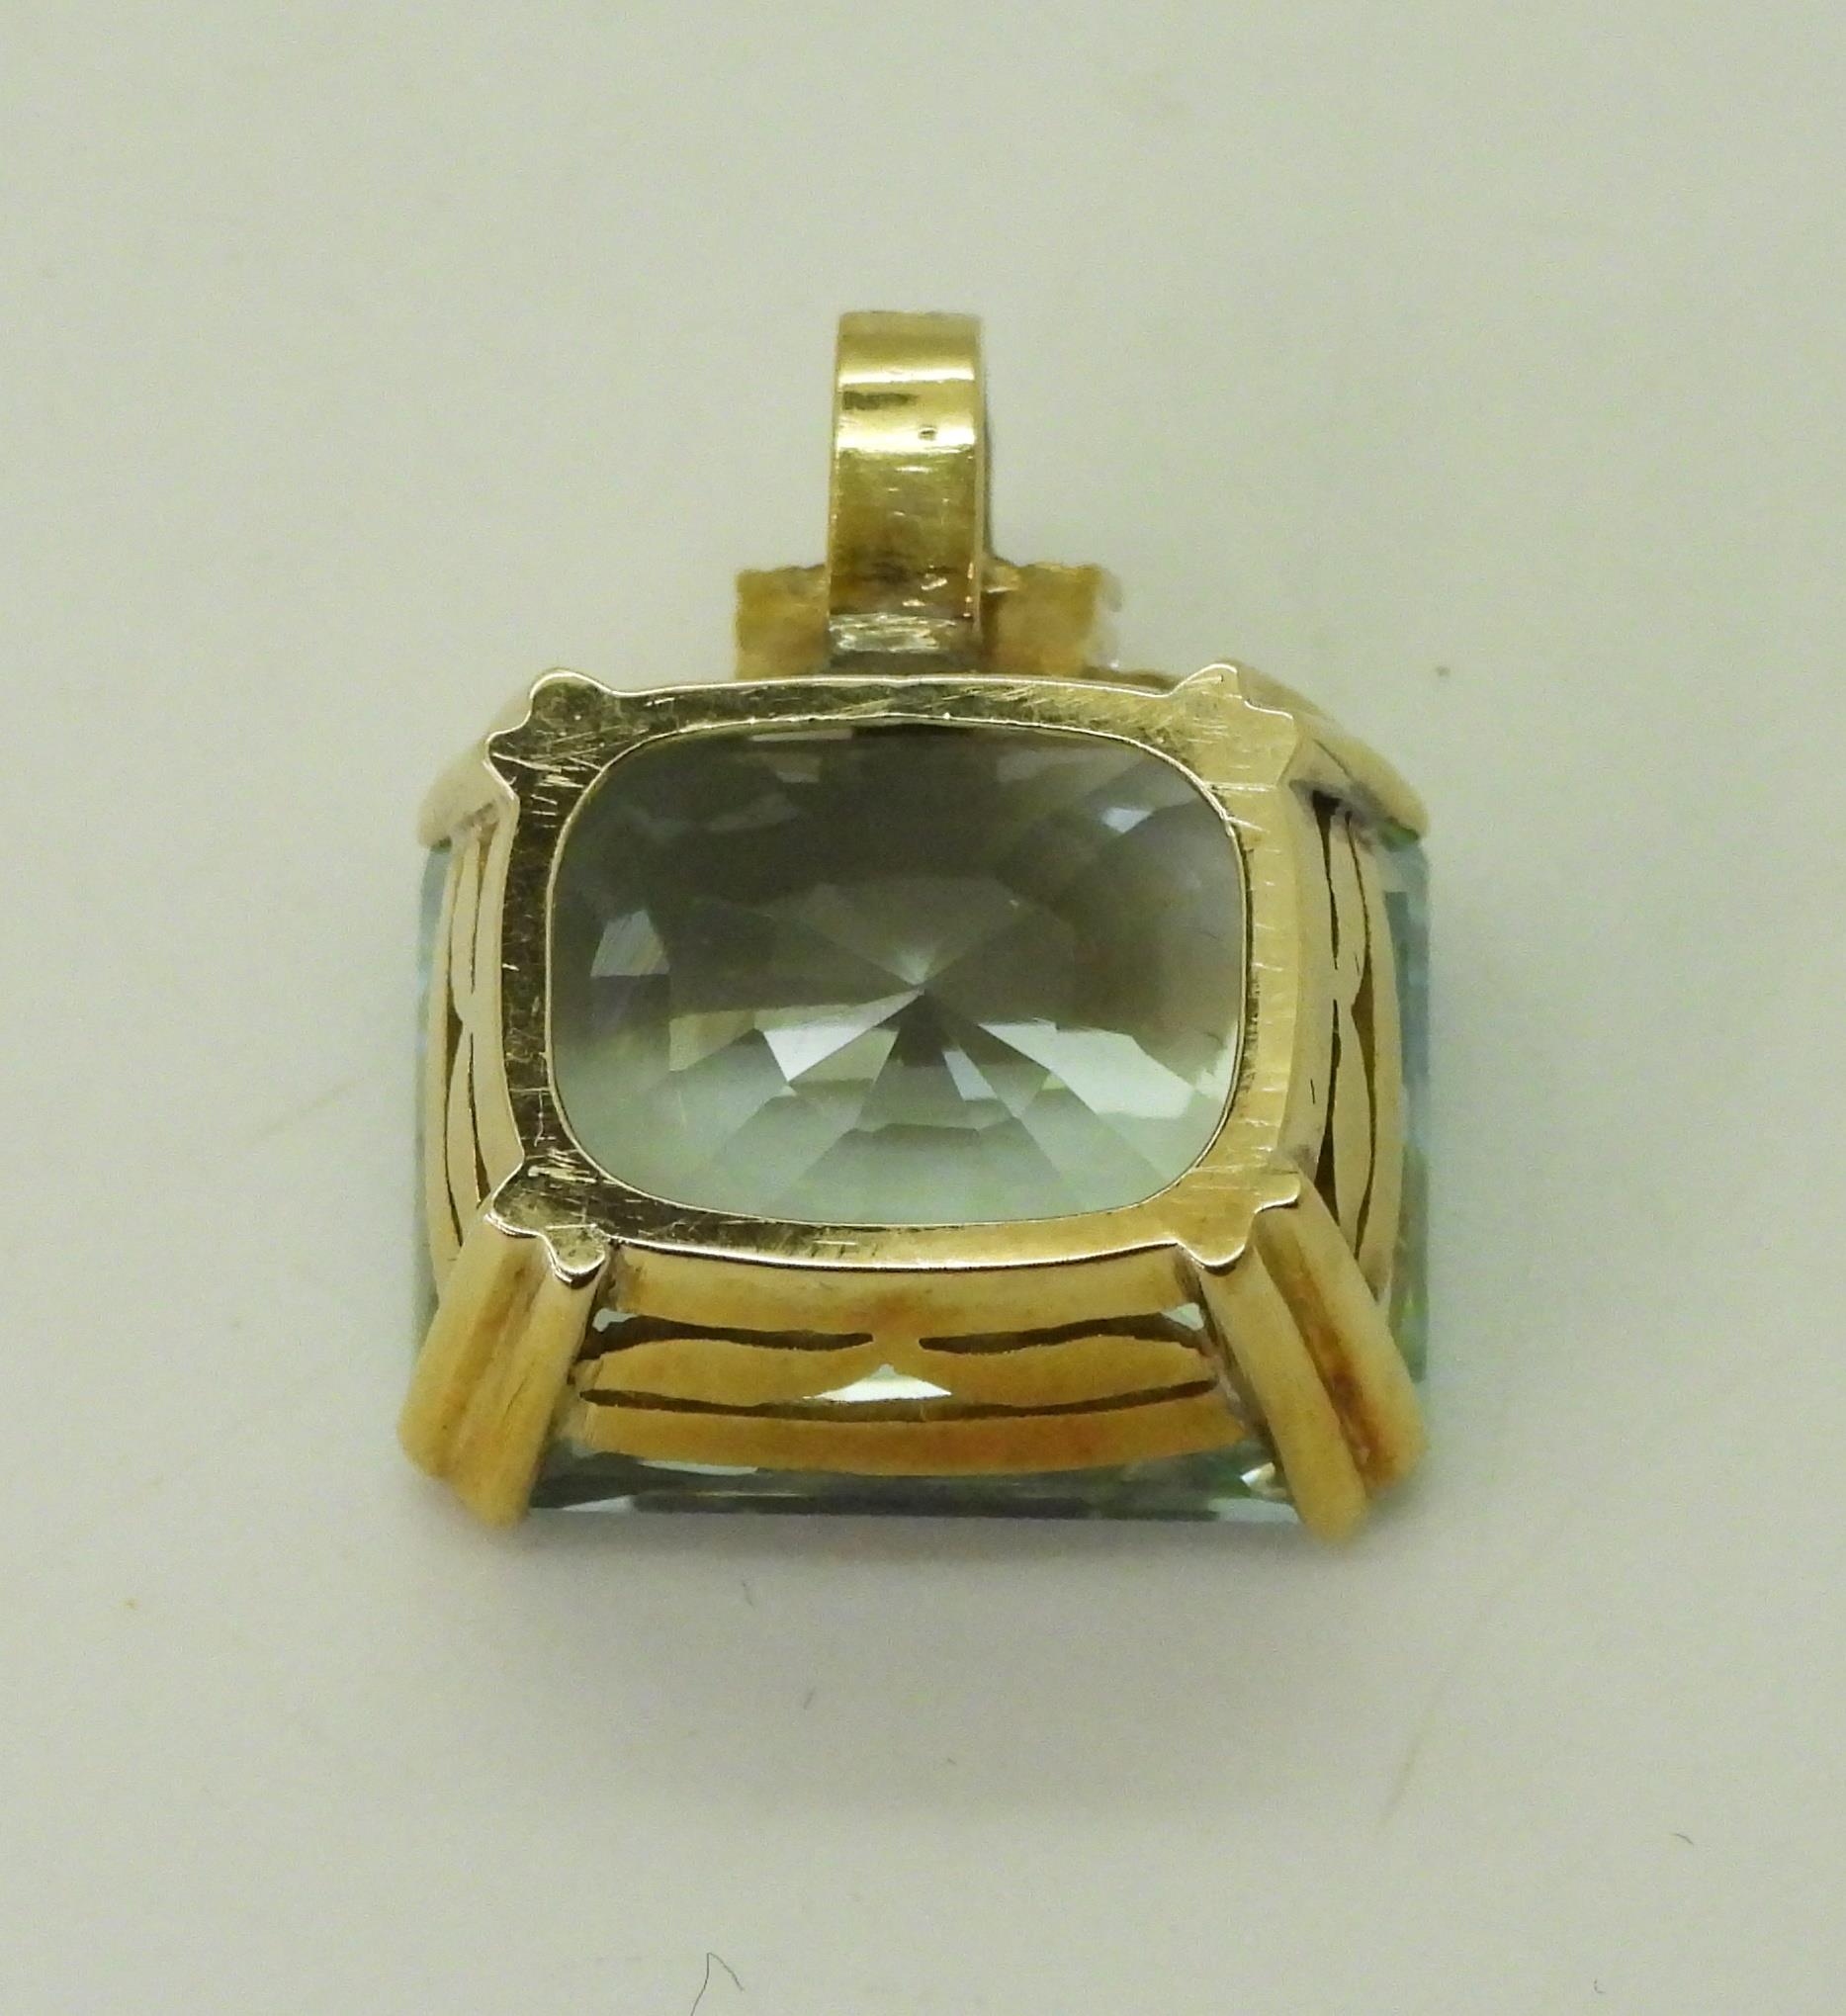 Aquamarine pendant set in 14k gold and further set with sparkling white sapphires. Aquamarine approx - Image 7 of 8